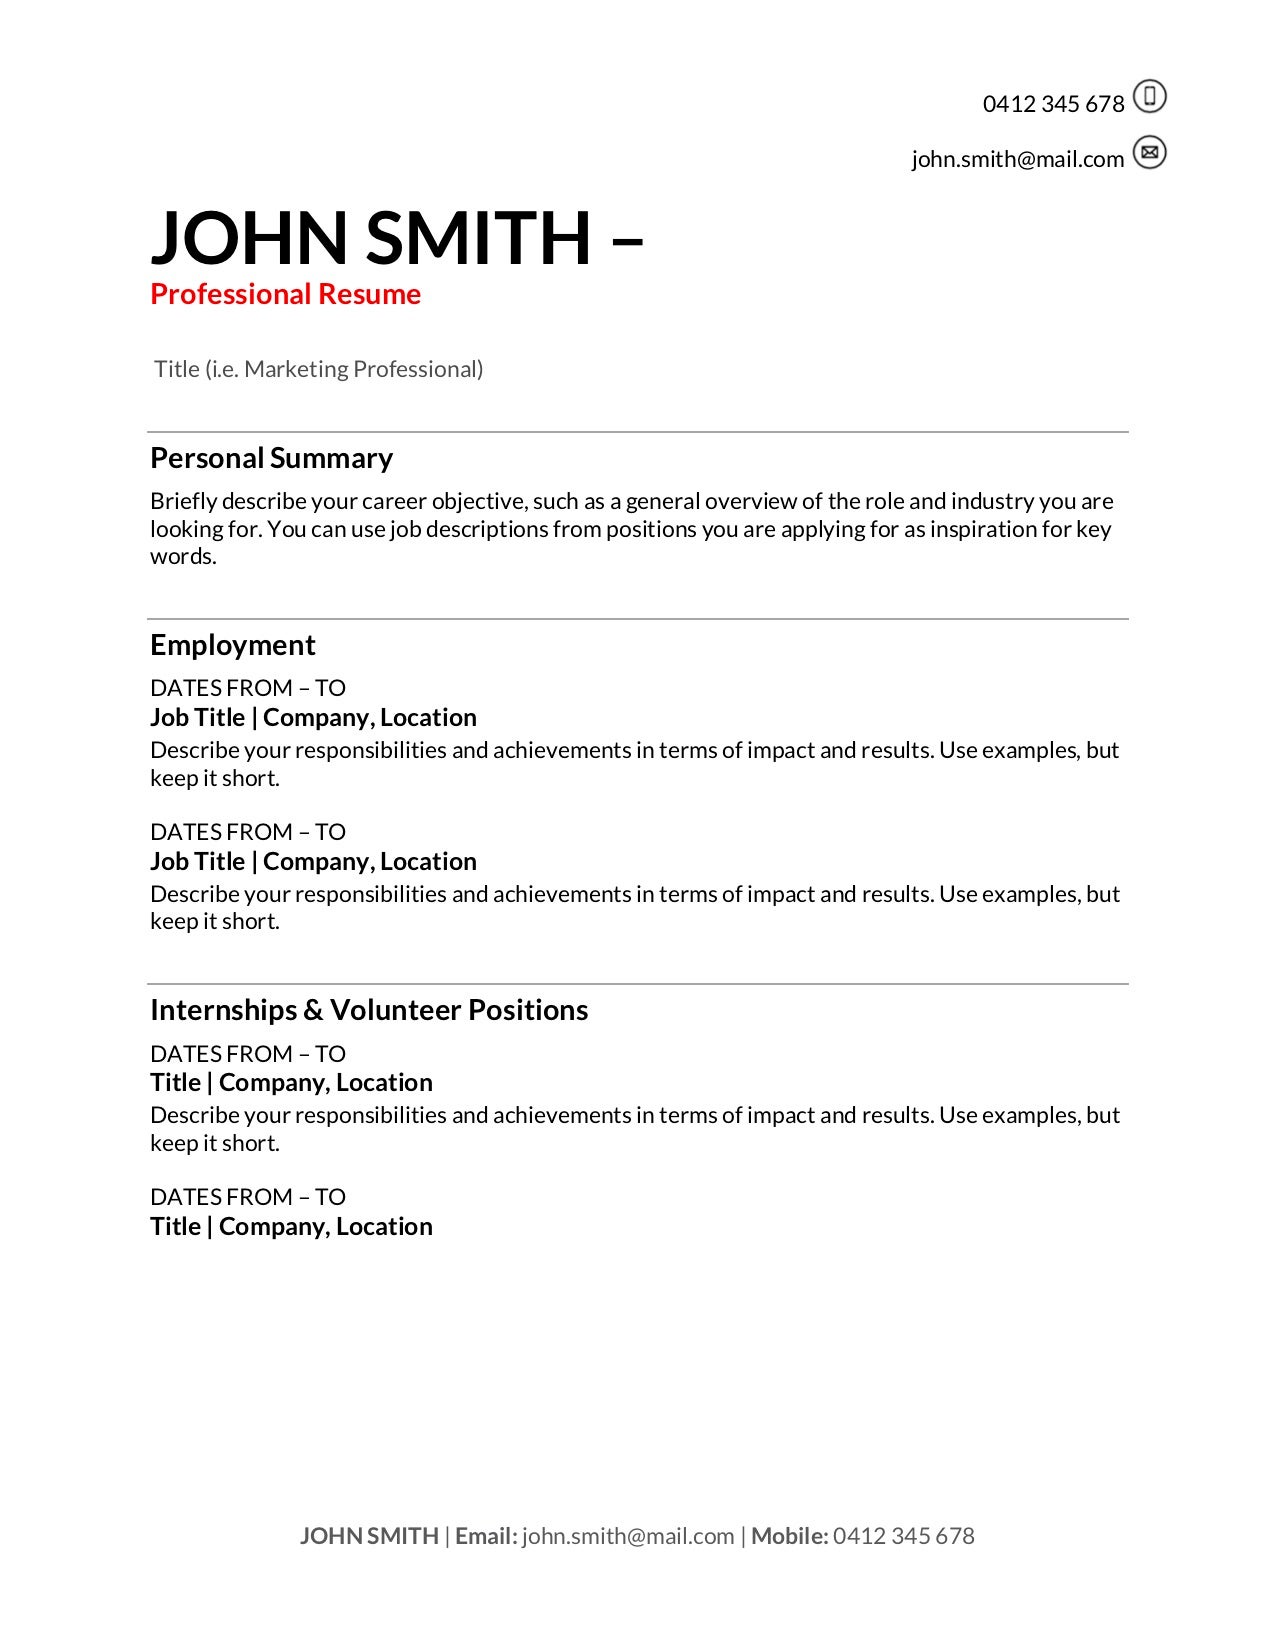 Dance Resume Template from www.training.com.au